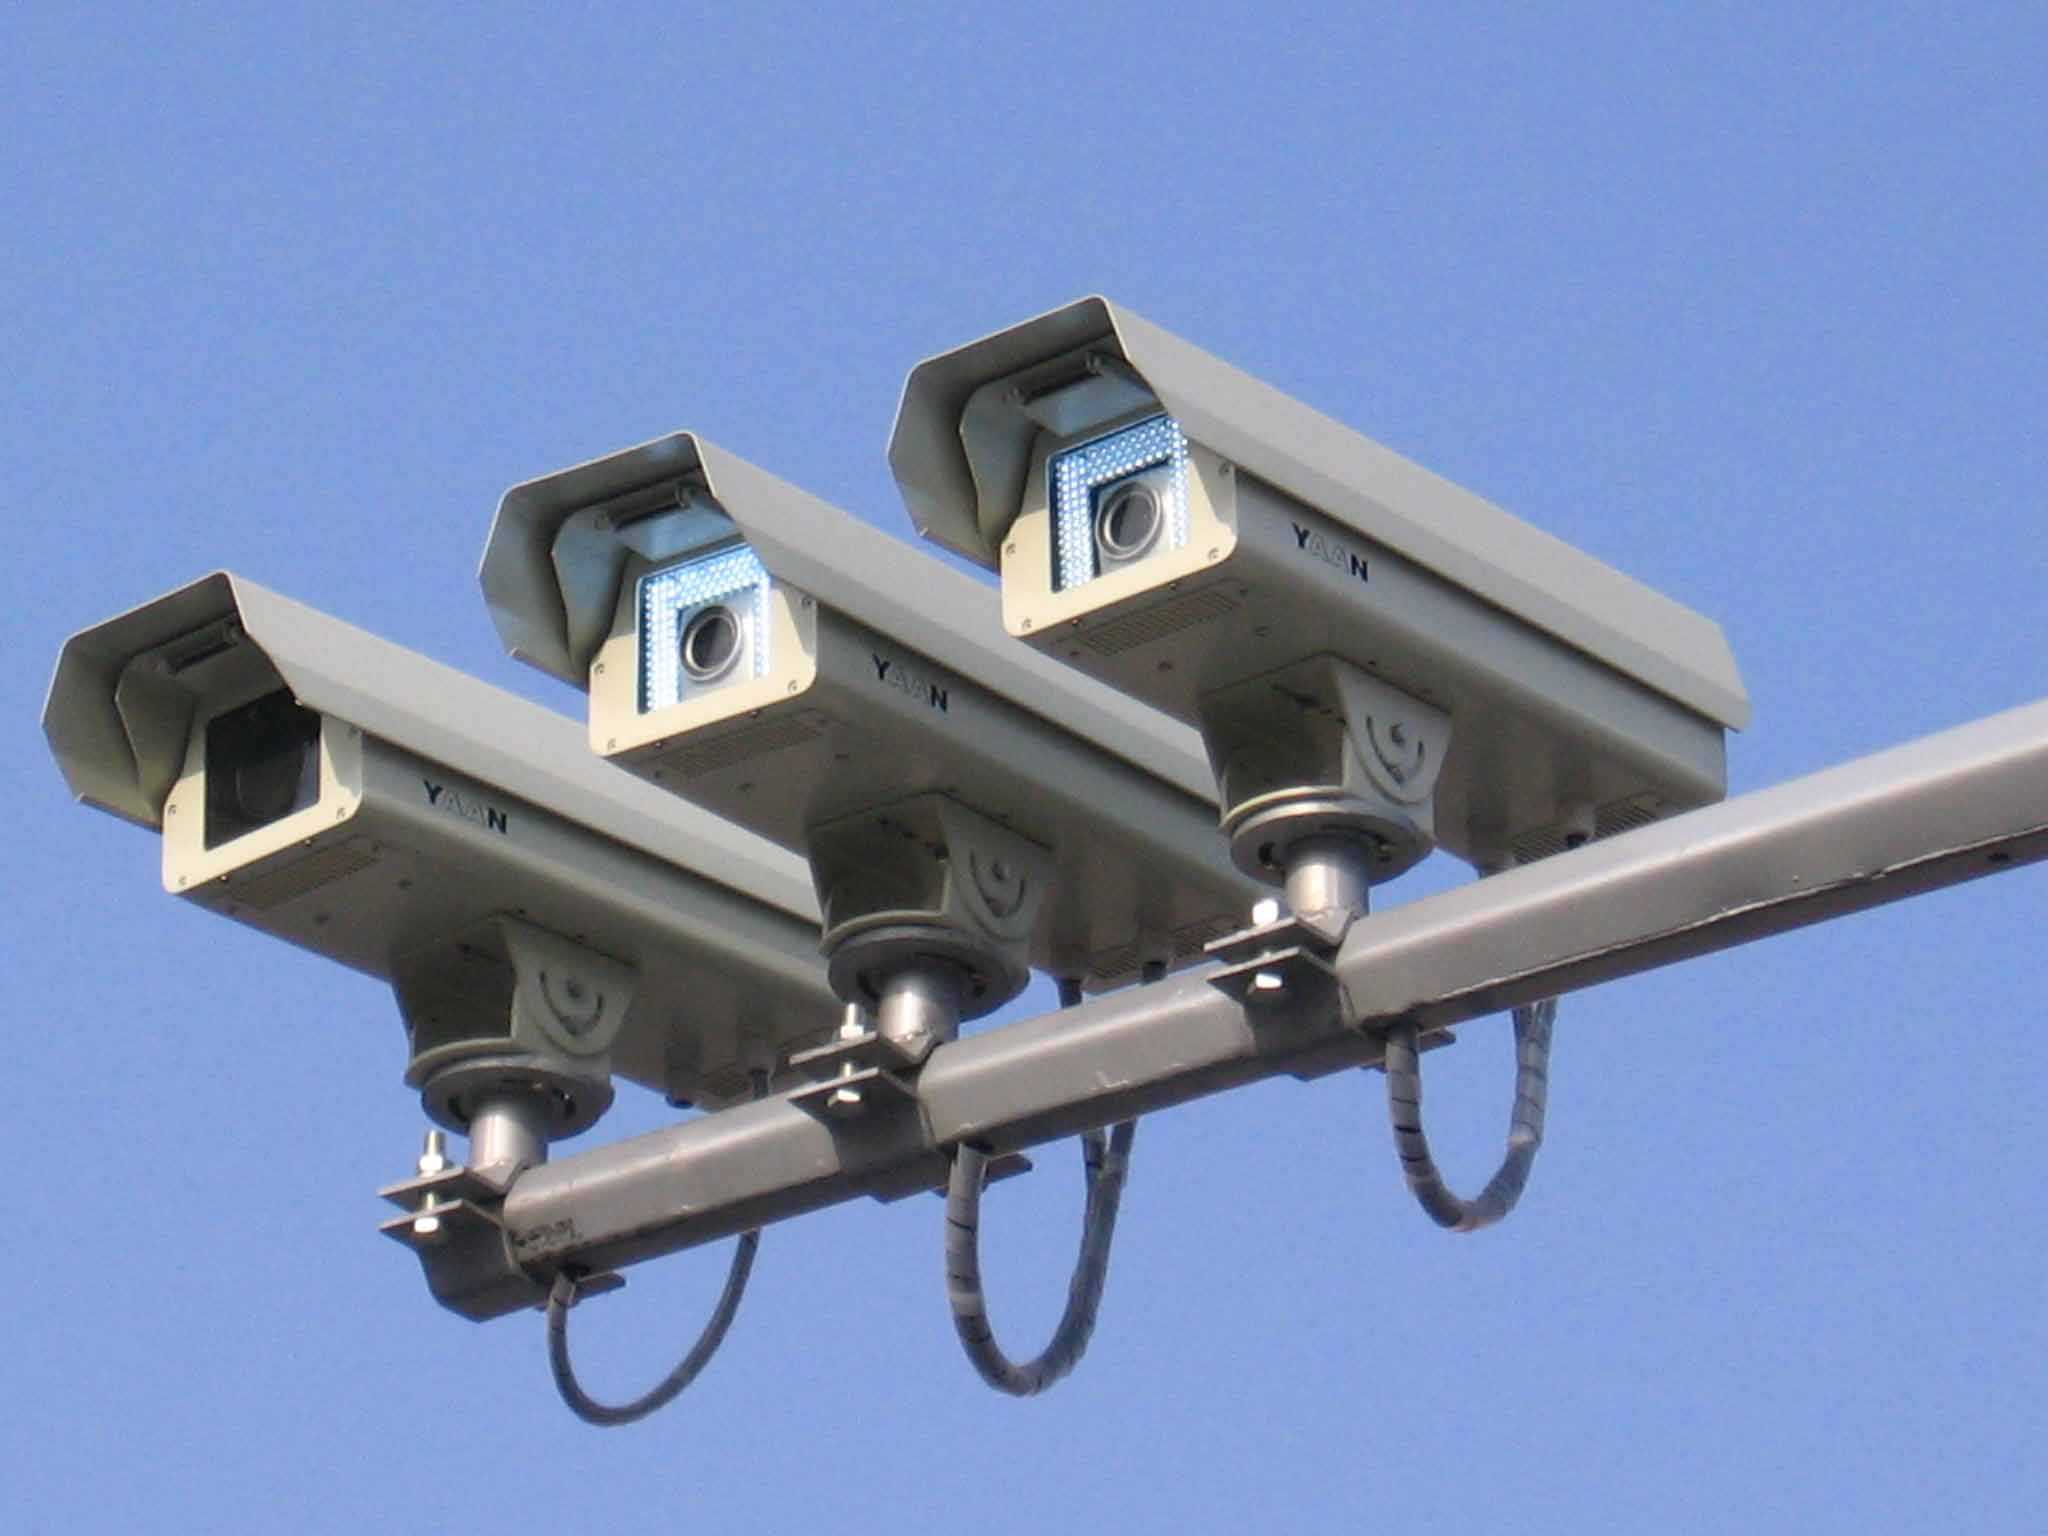 Video surveillance firms Hikvision and Dahua to be added to US blacklist, says Bloomberg